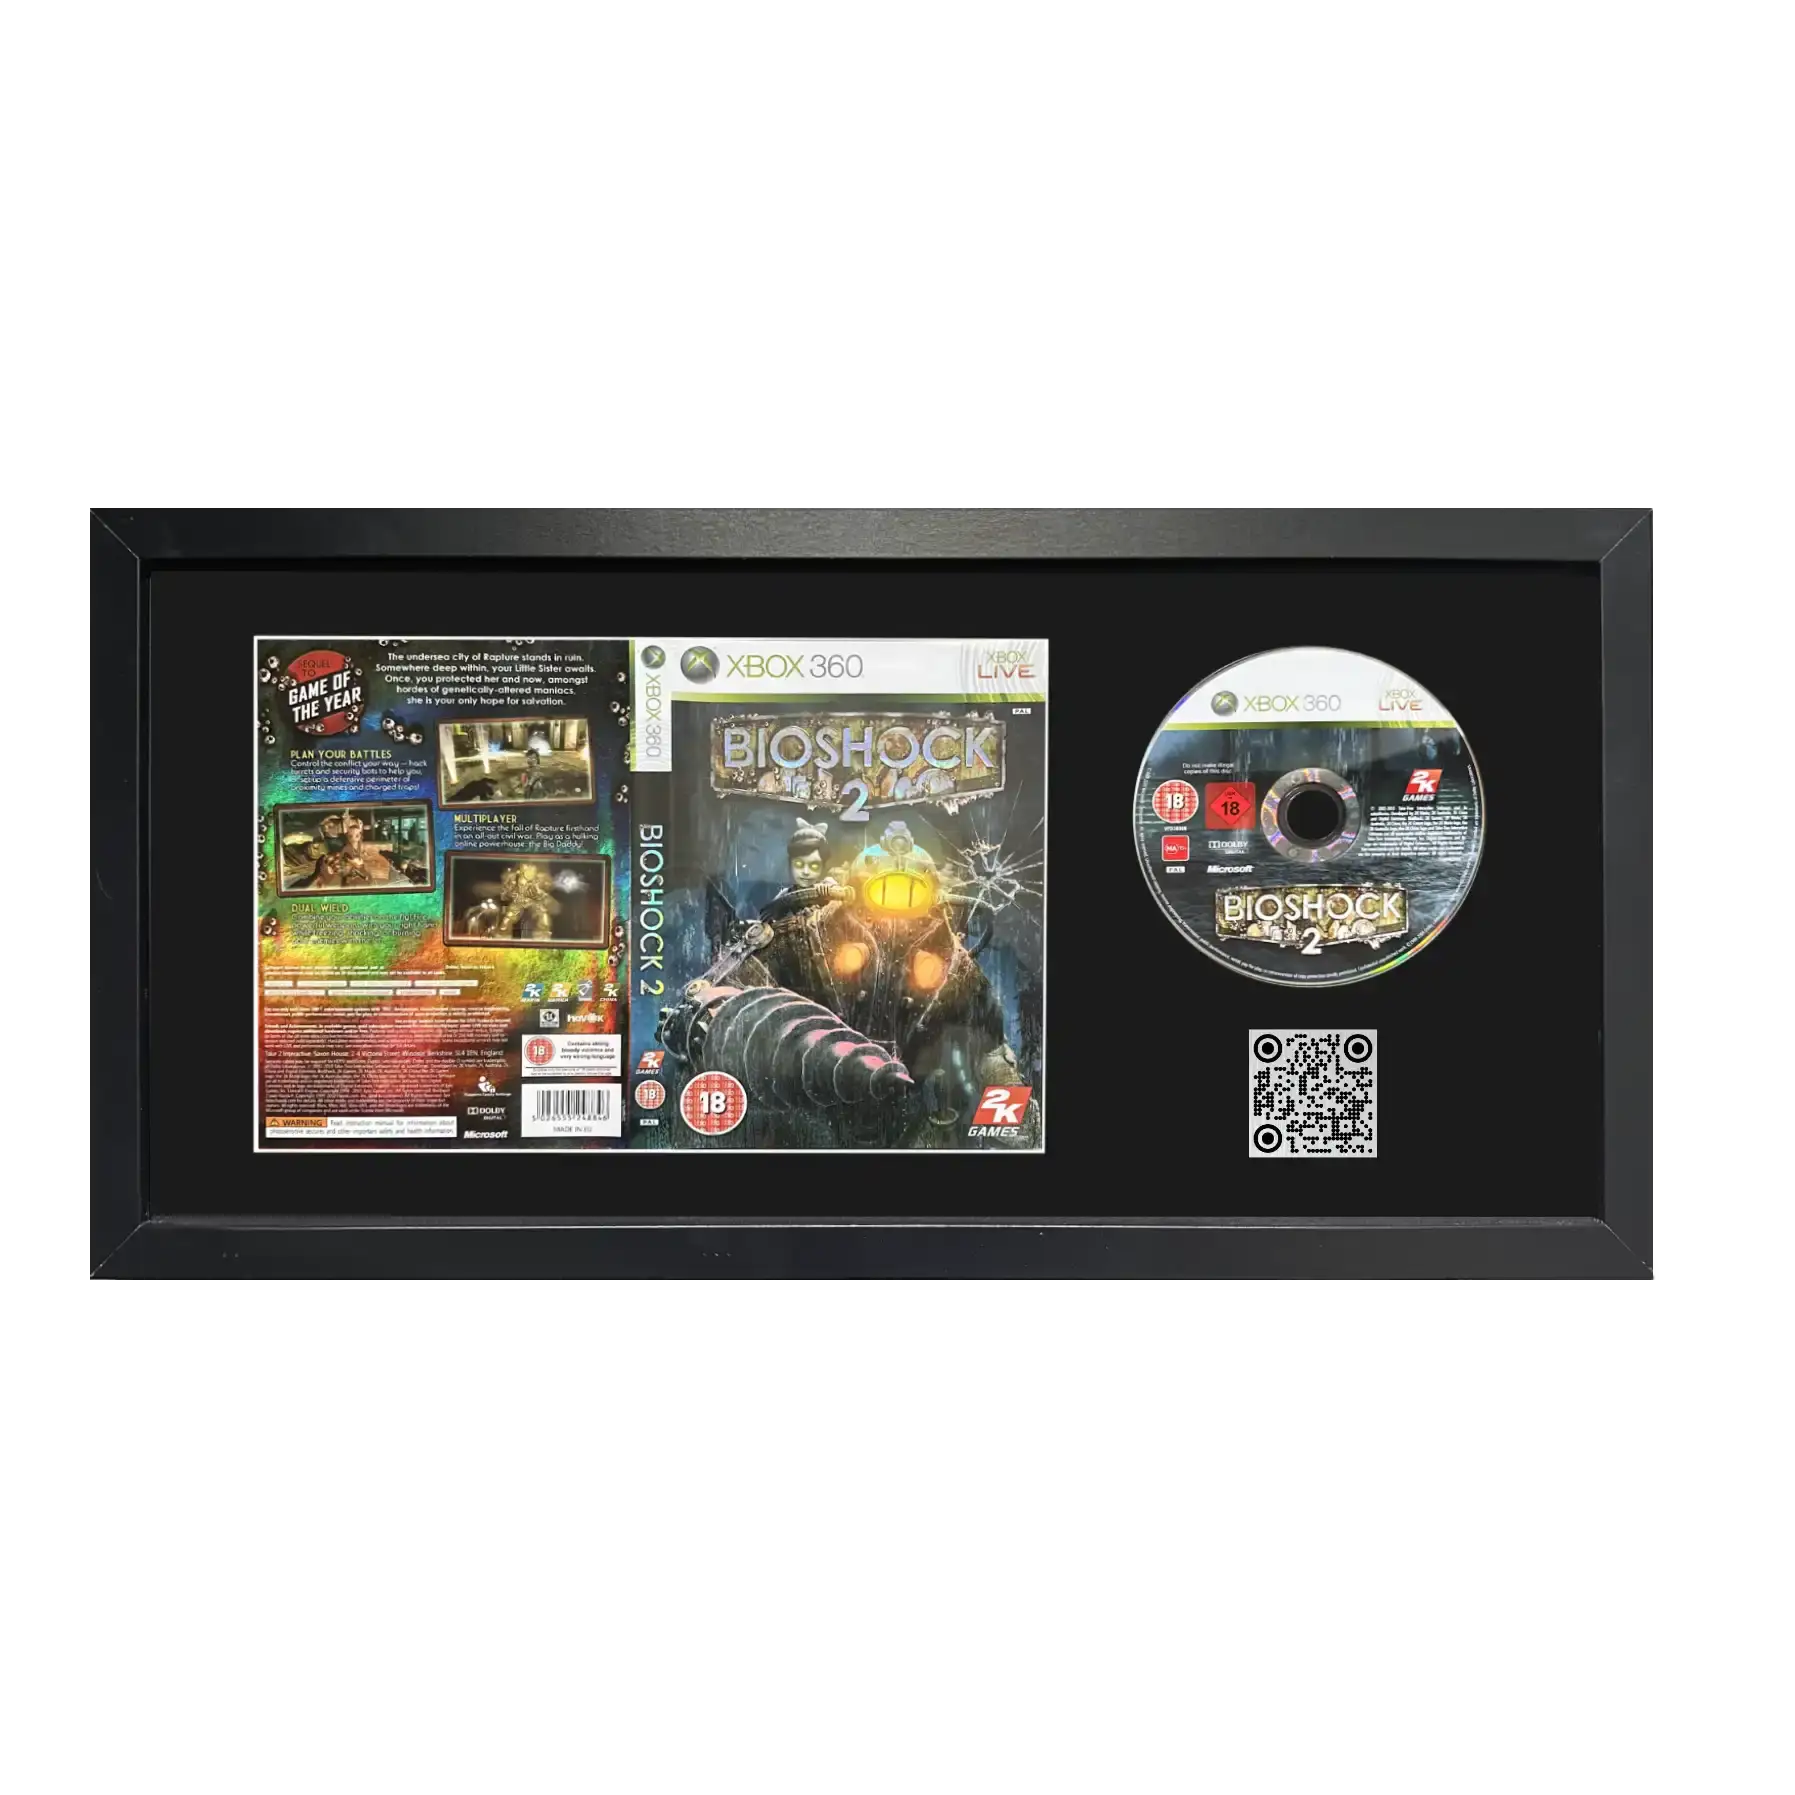 Bioshock 2 for Xbox 360 case and disc framed with a QR code